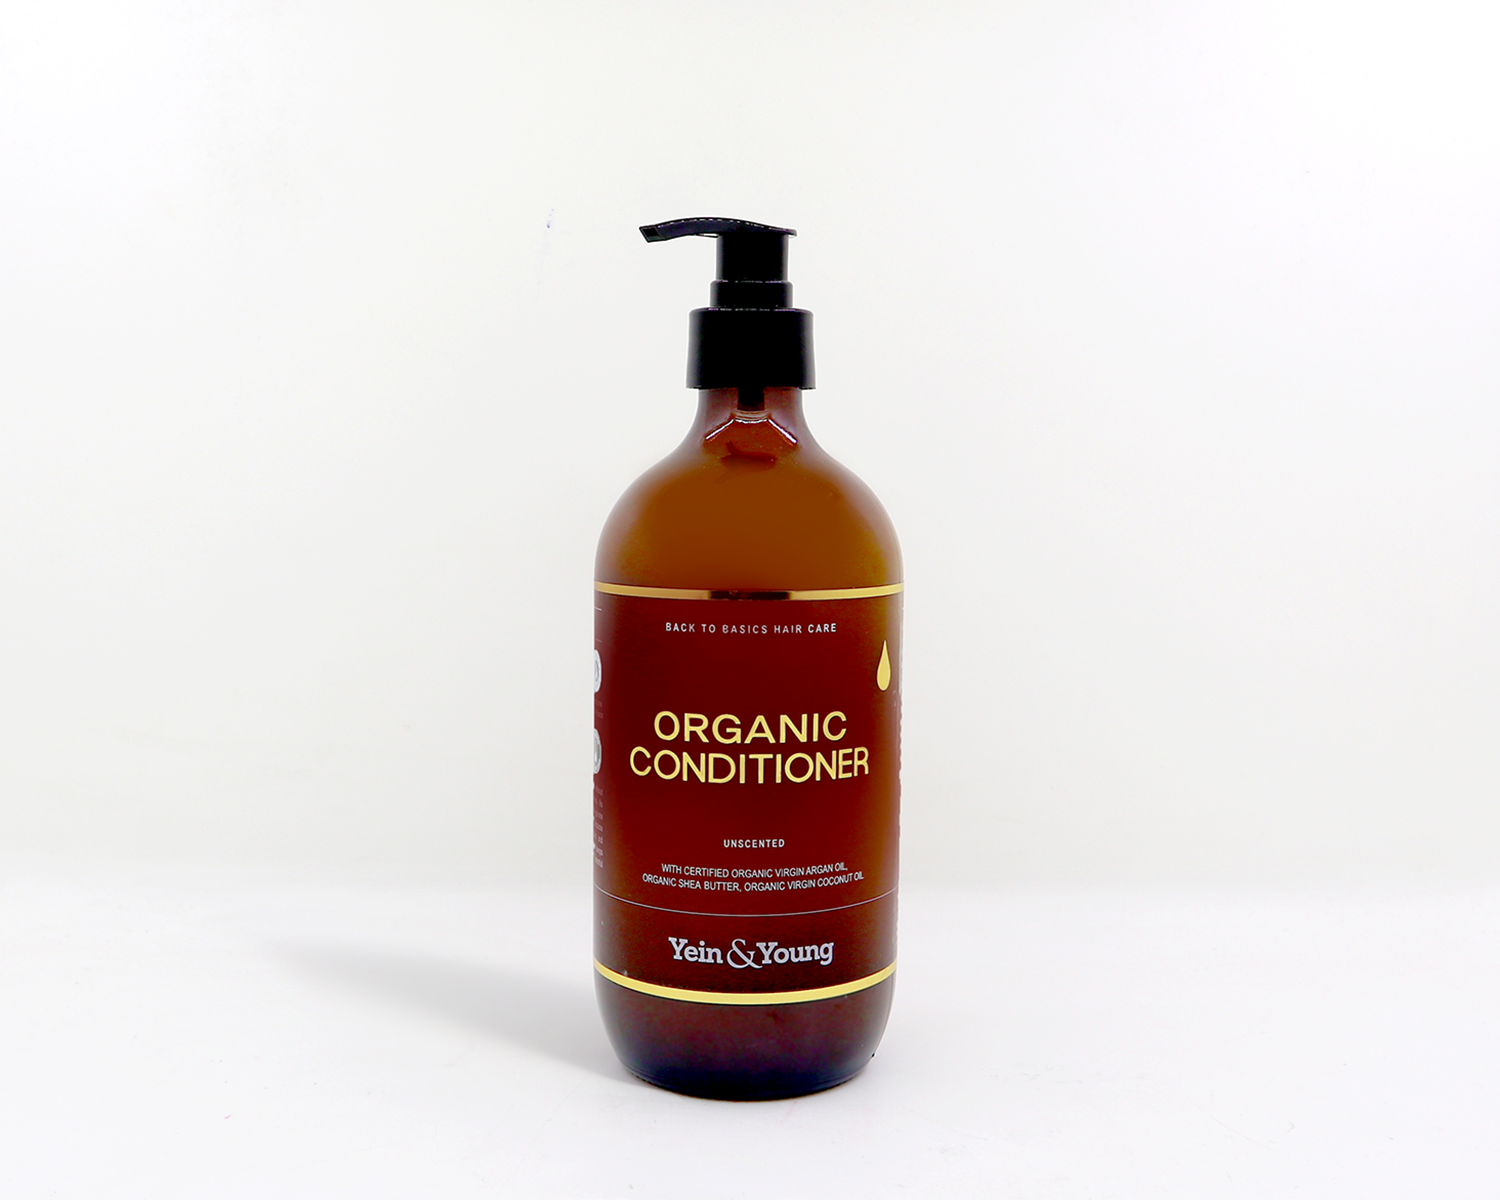 Yein&Young Organic Conditioner - Unscented Ingredients - Craftiviti